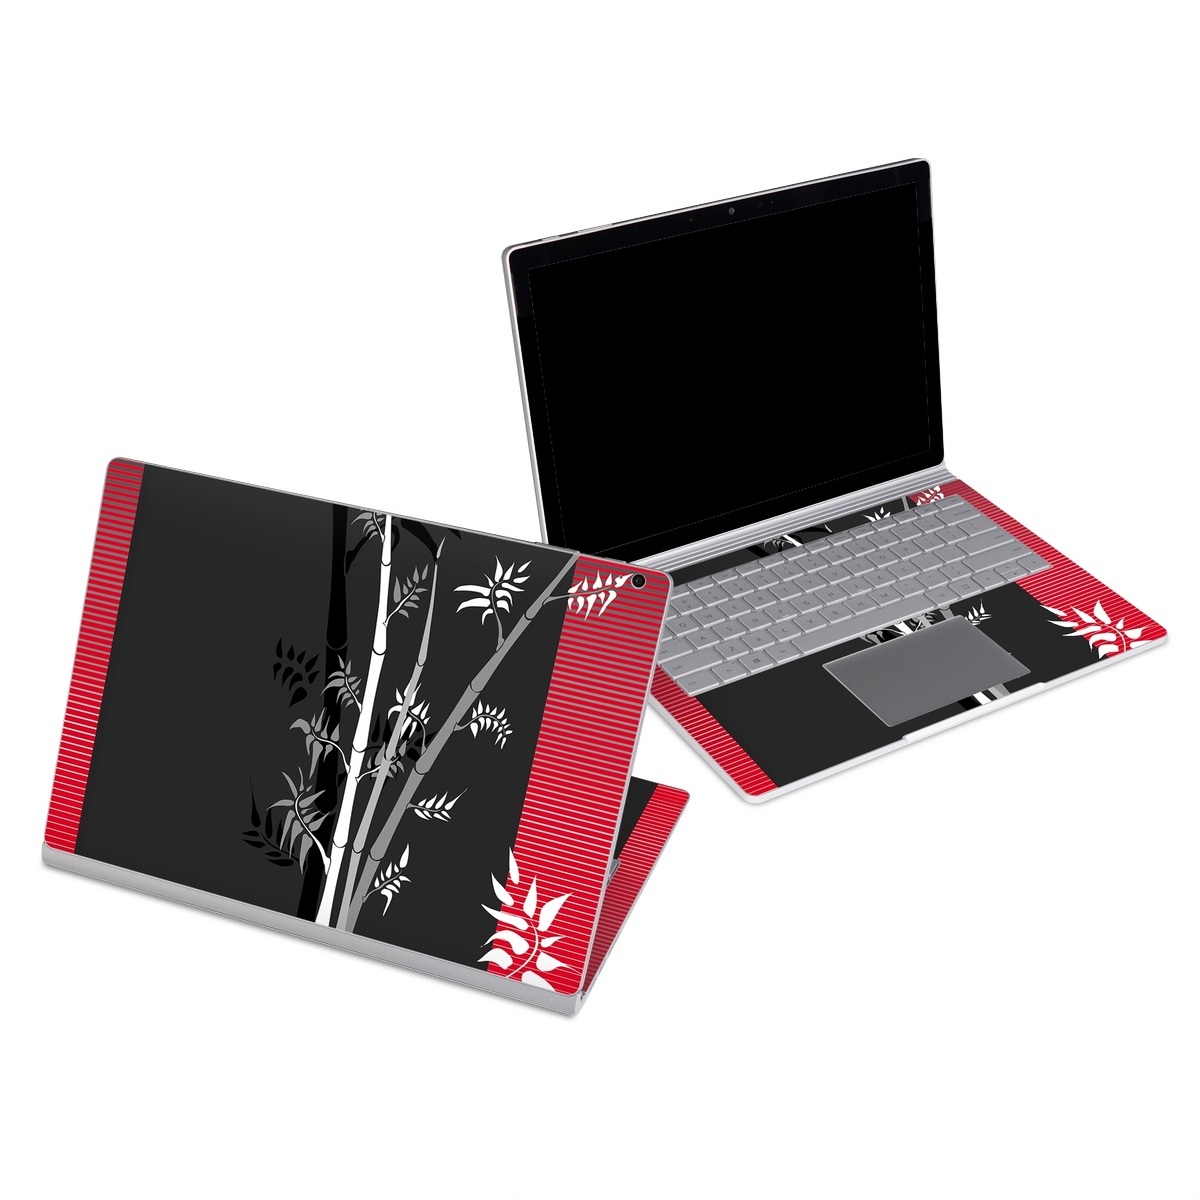 Microsoft Surface Book Series Skin design of Tree, Branch, Plant, Graphic design, Bamboo, Illustration, Plant stem, Black-and-white, with black, red, gray, white colors